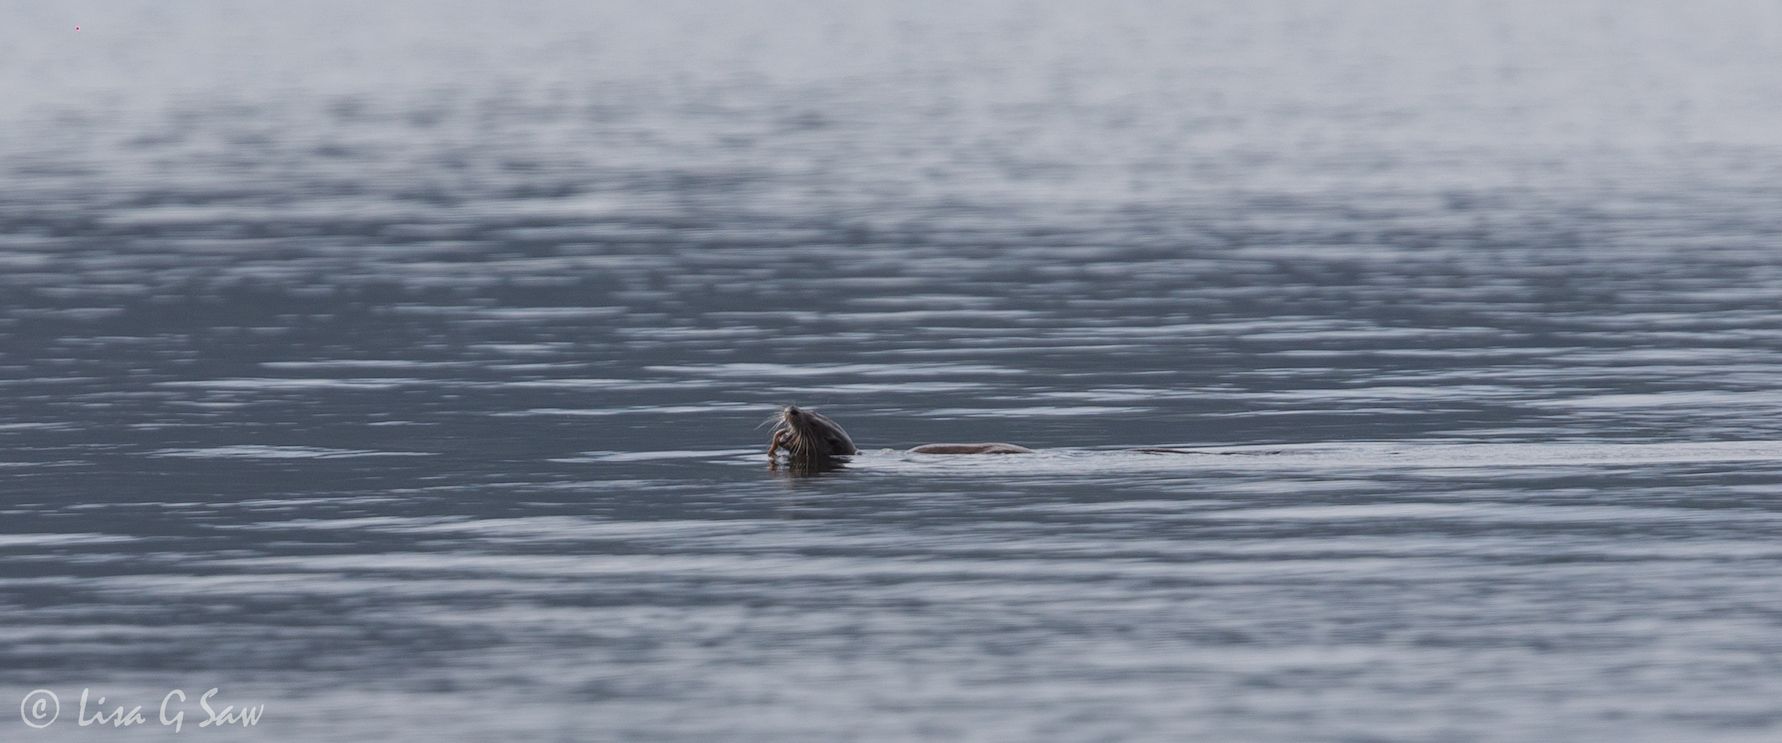 River Otter eating out on the water in loch